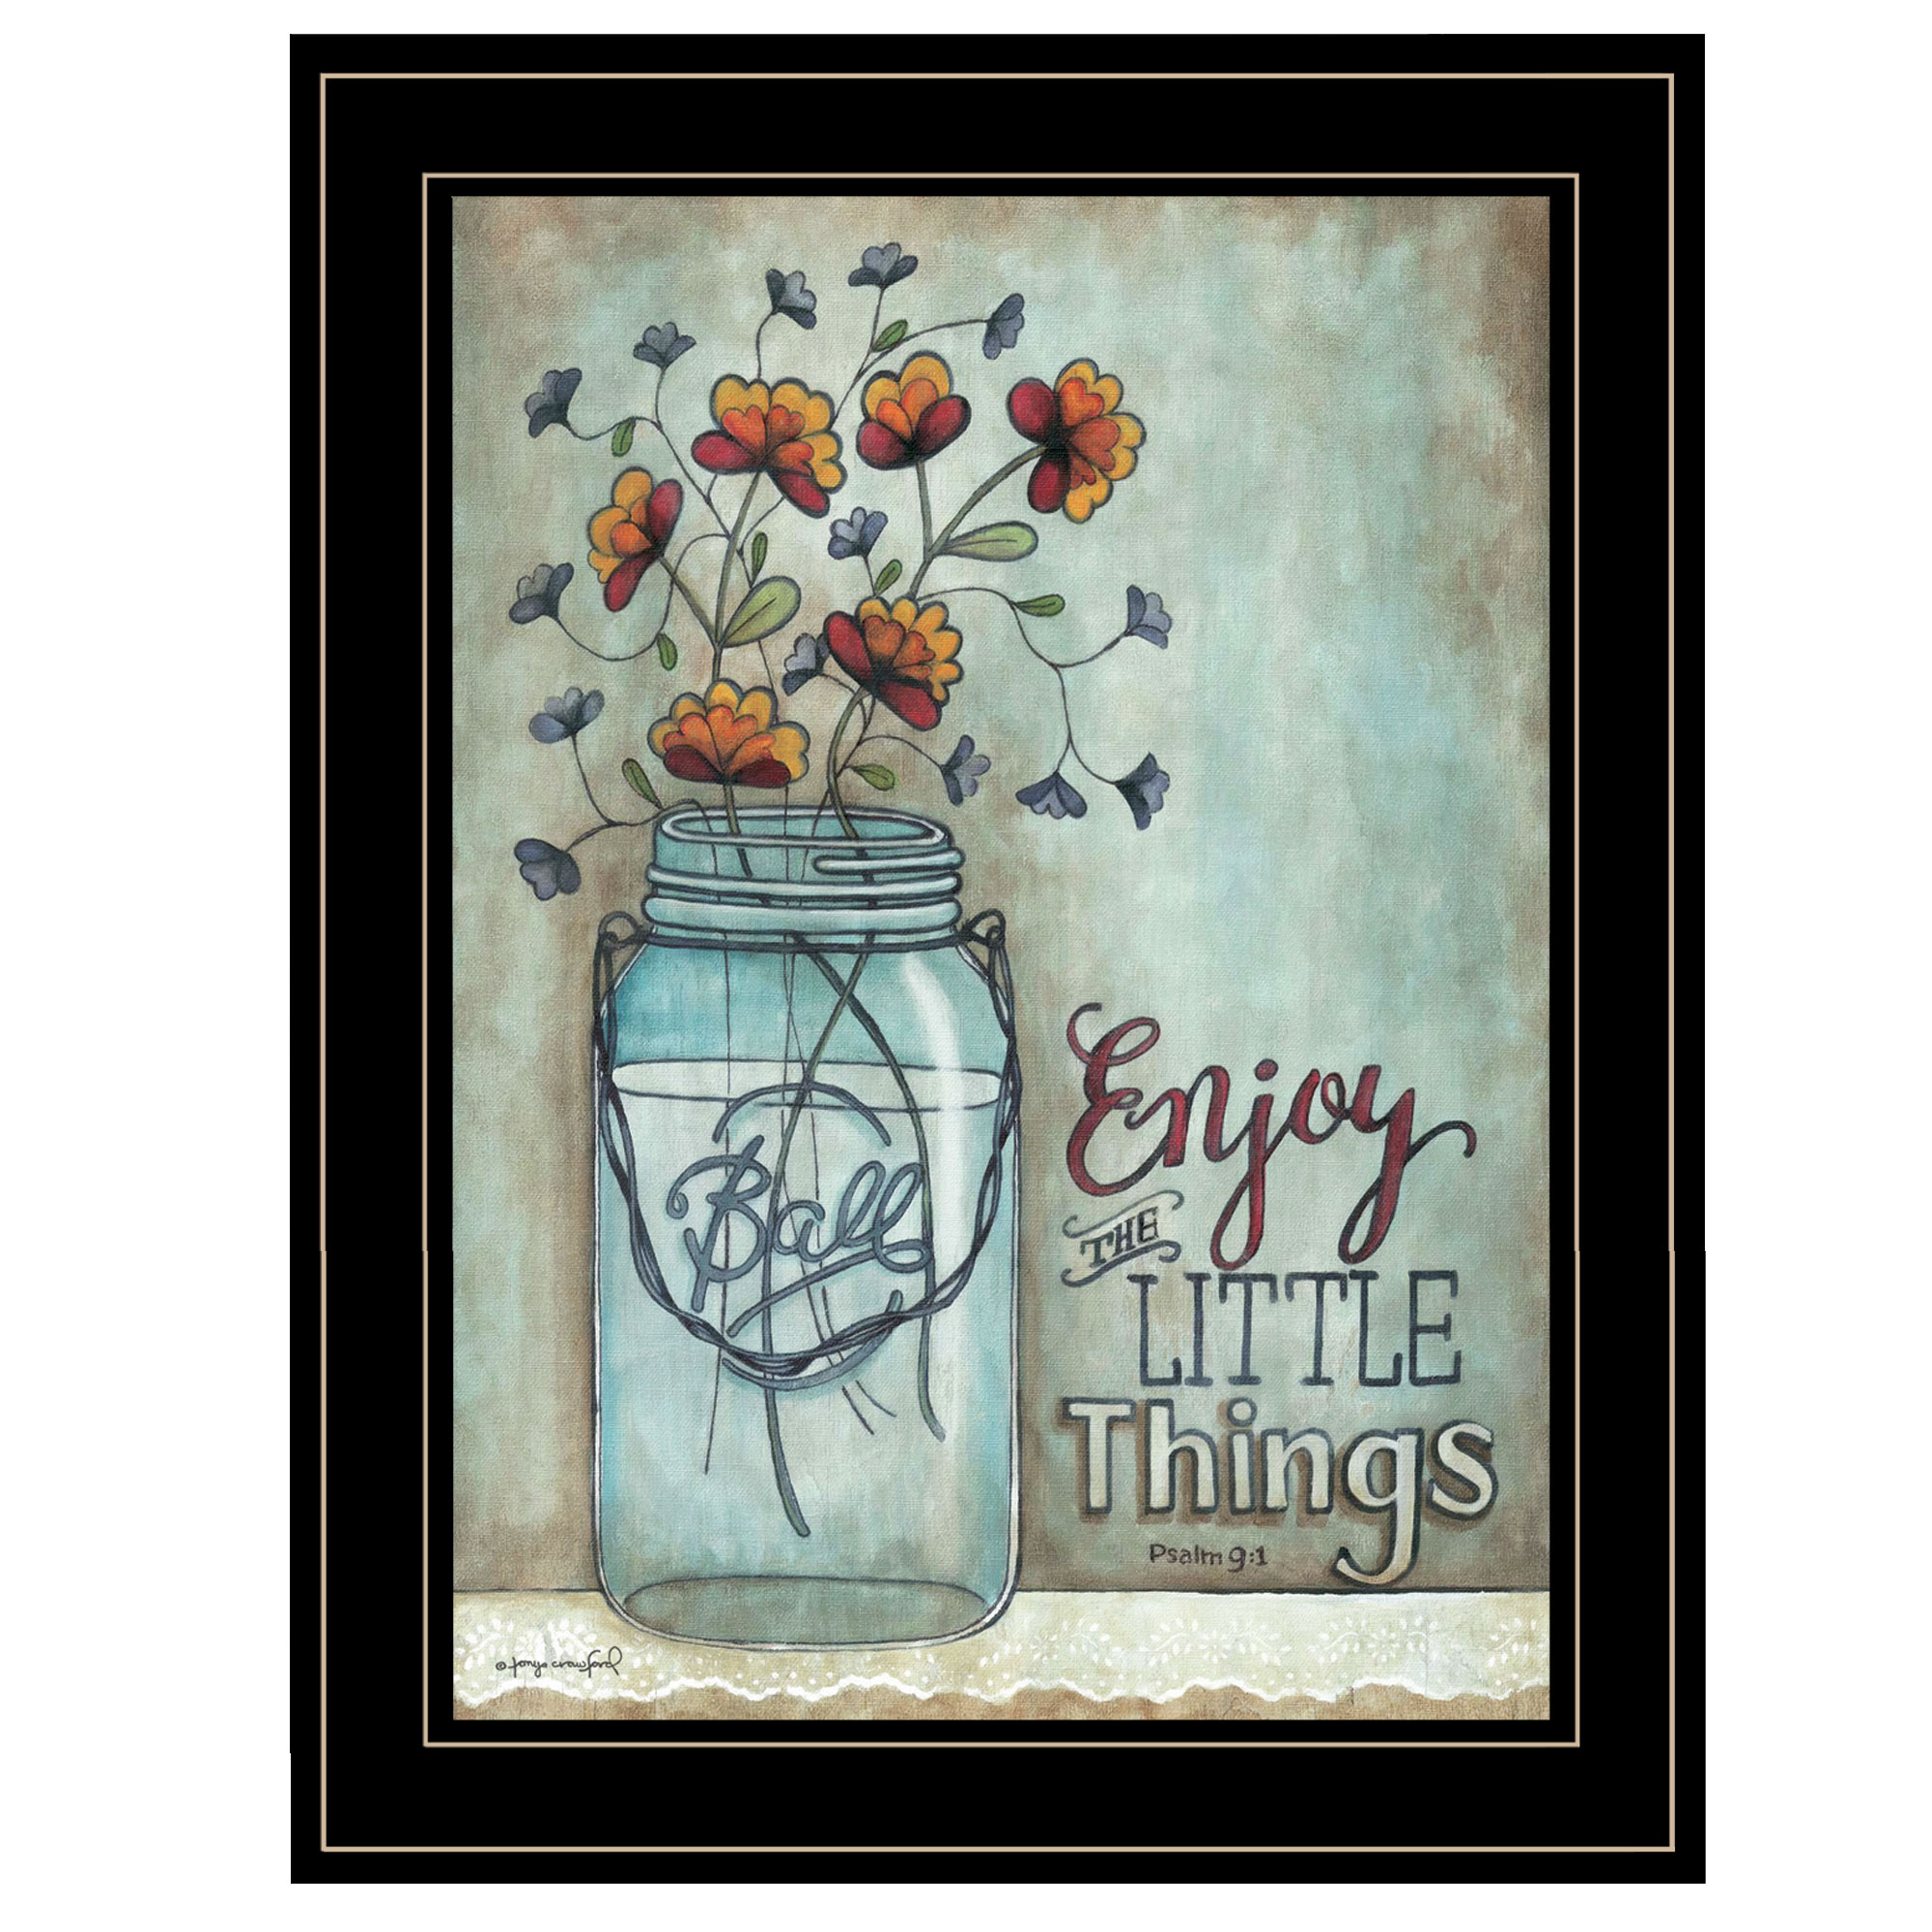 "Enjoy the Little Things" by Tonya Crawford, Ready to Hang Framed Print, Black Frame